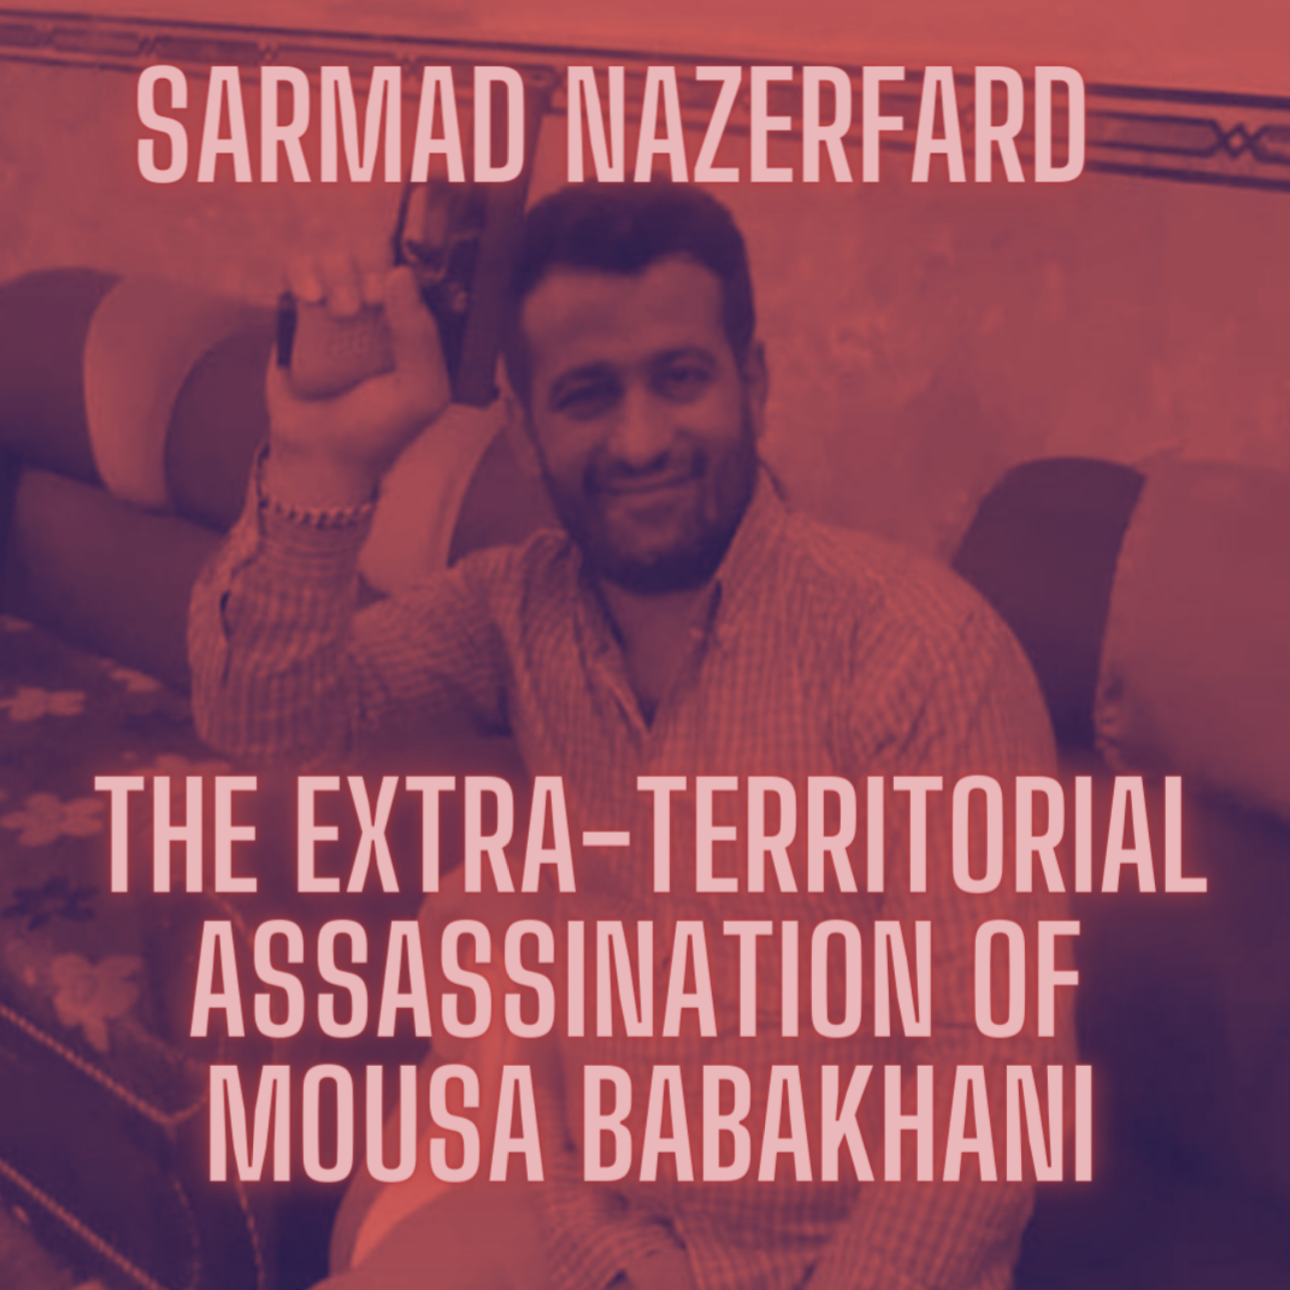 The Extra-Territorial Assassination of Mousa Babakhani